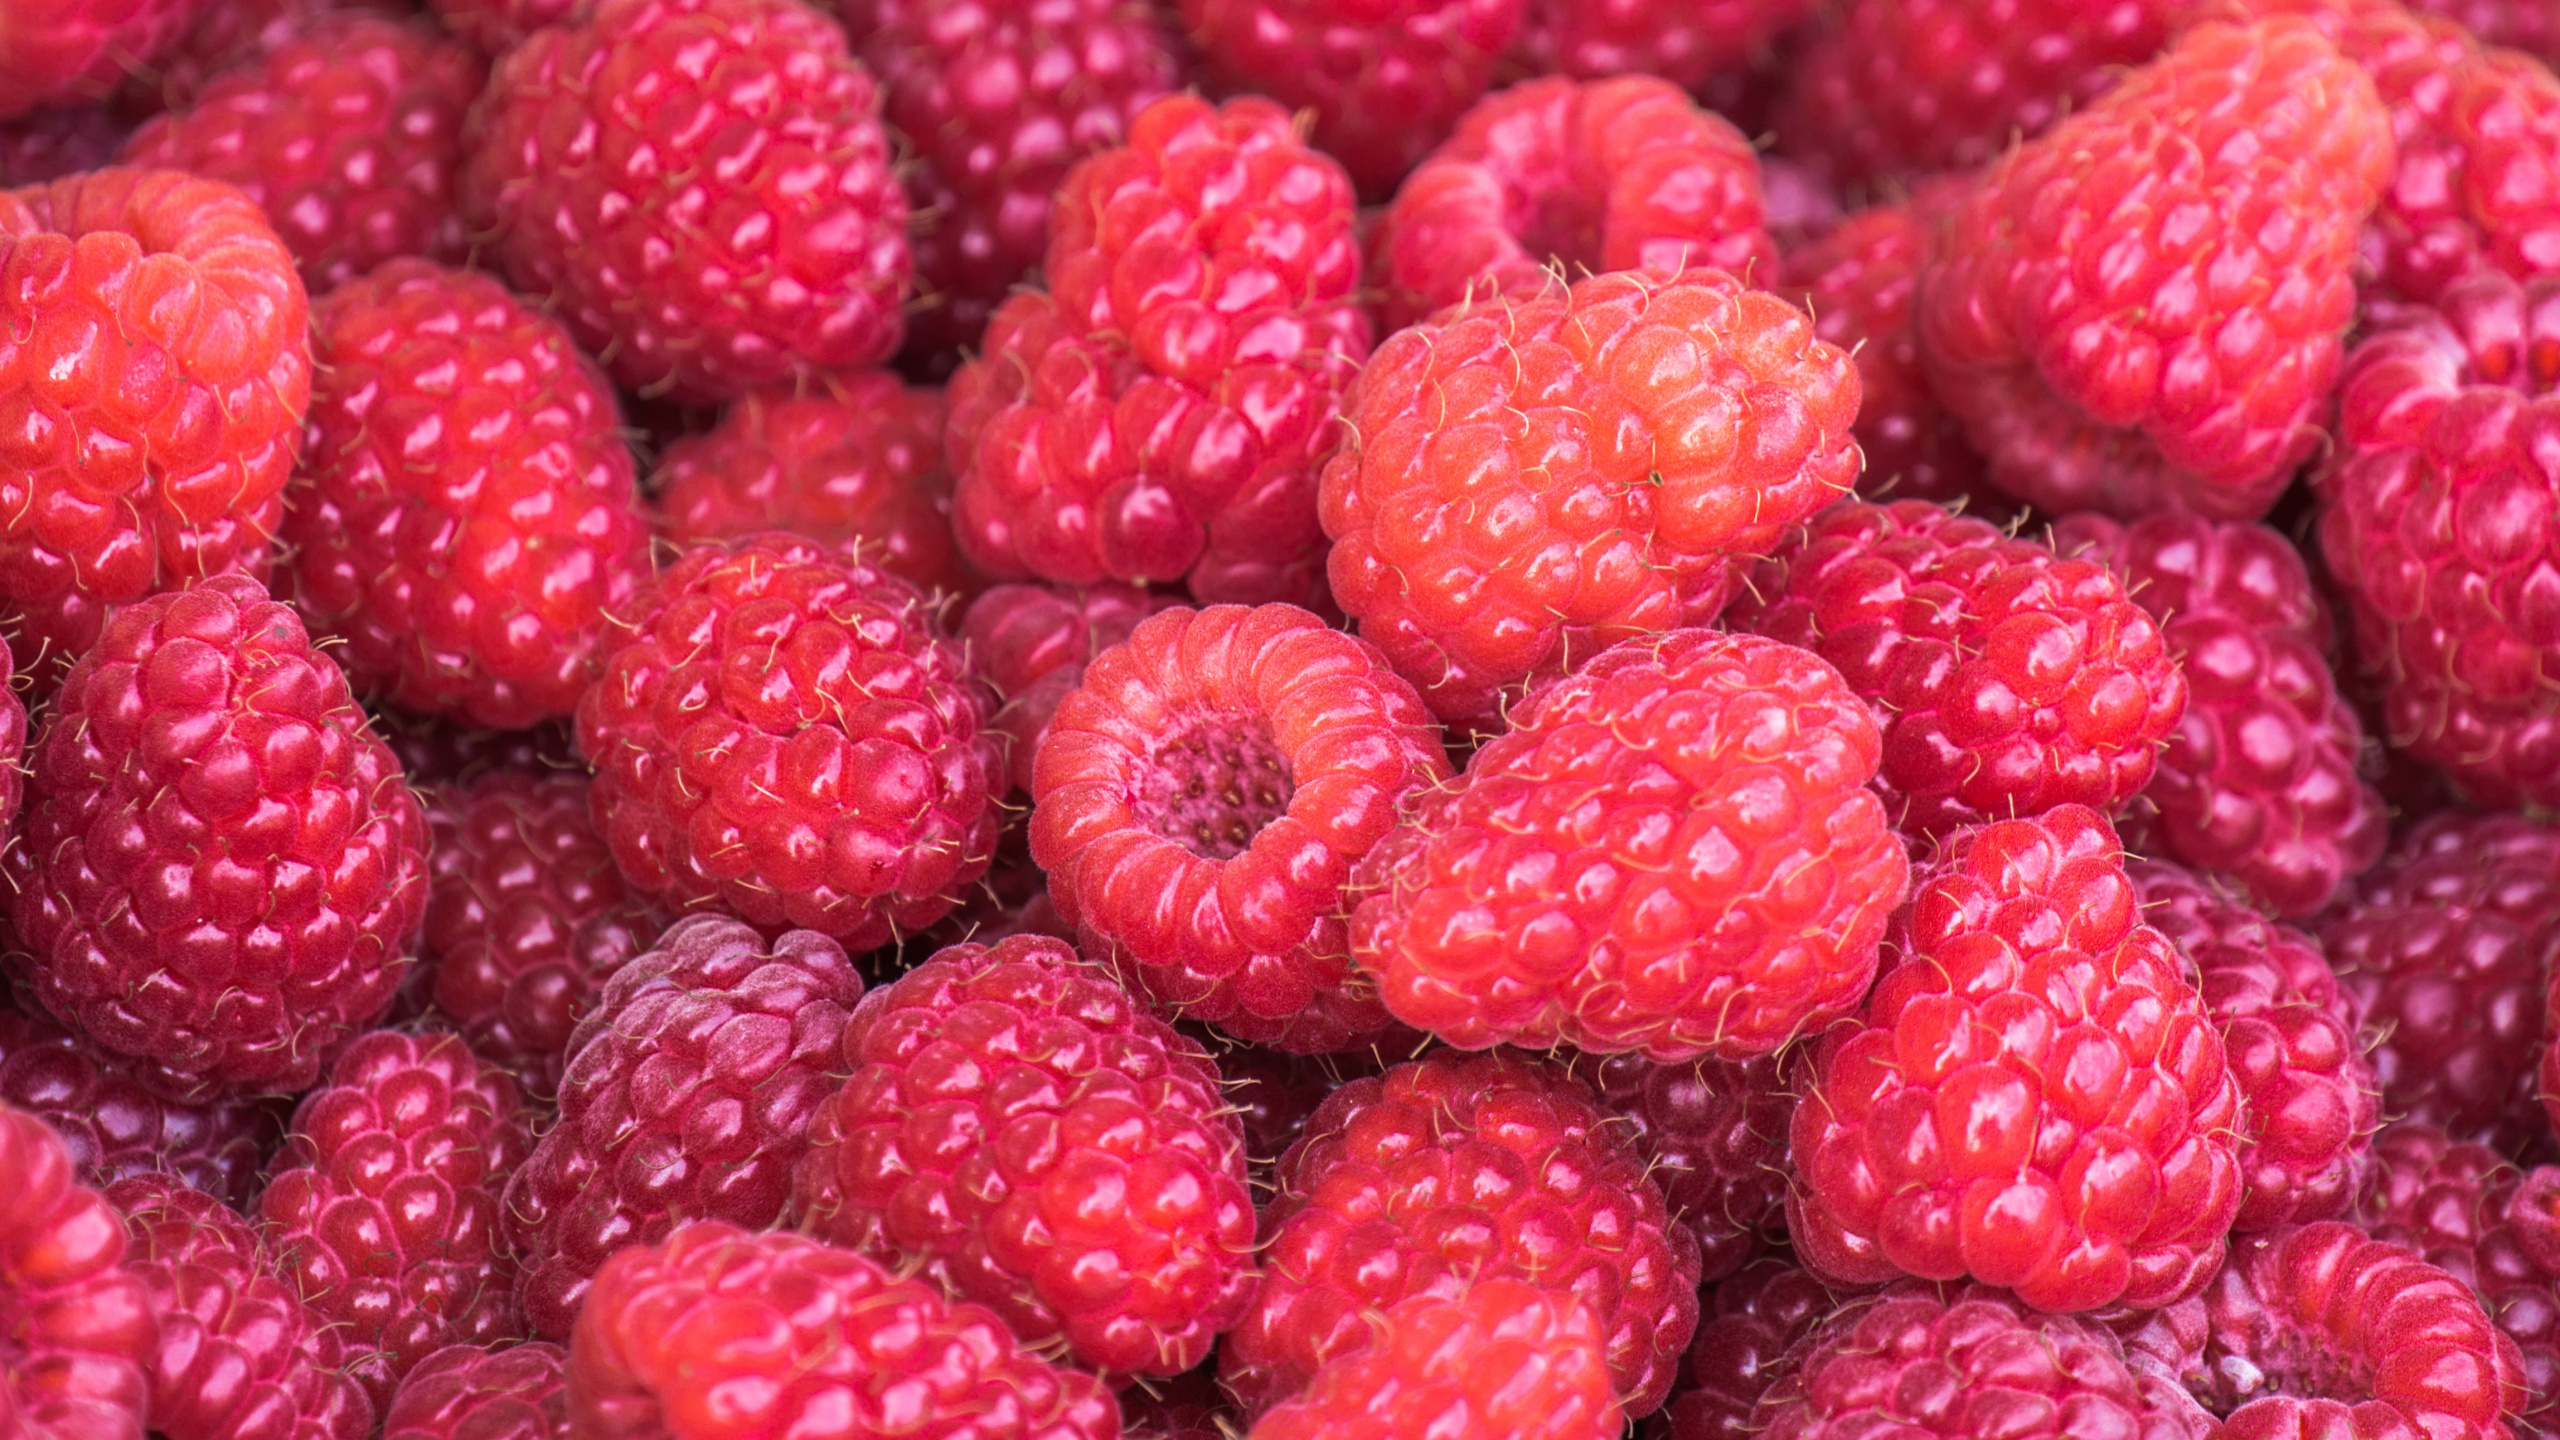 Red Raspberry Fruits in Close up Photography. Wallpaper in 2560x1440 Resolution